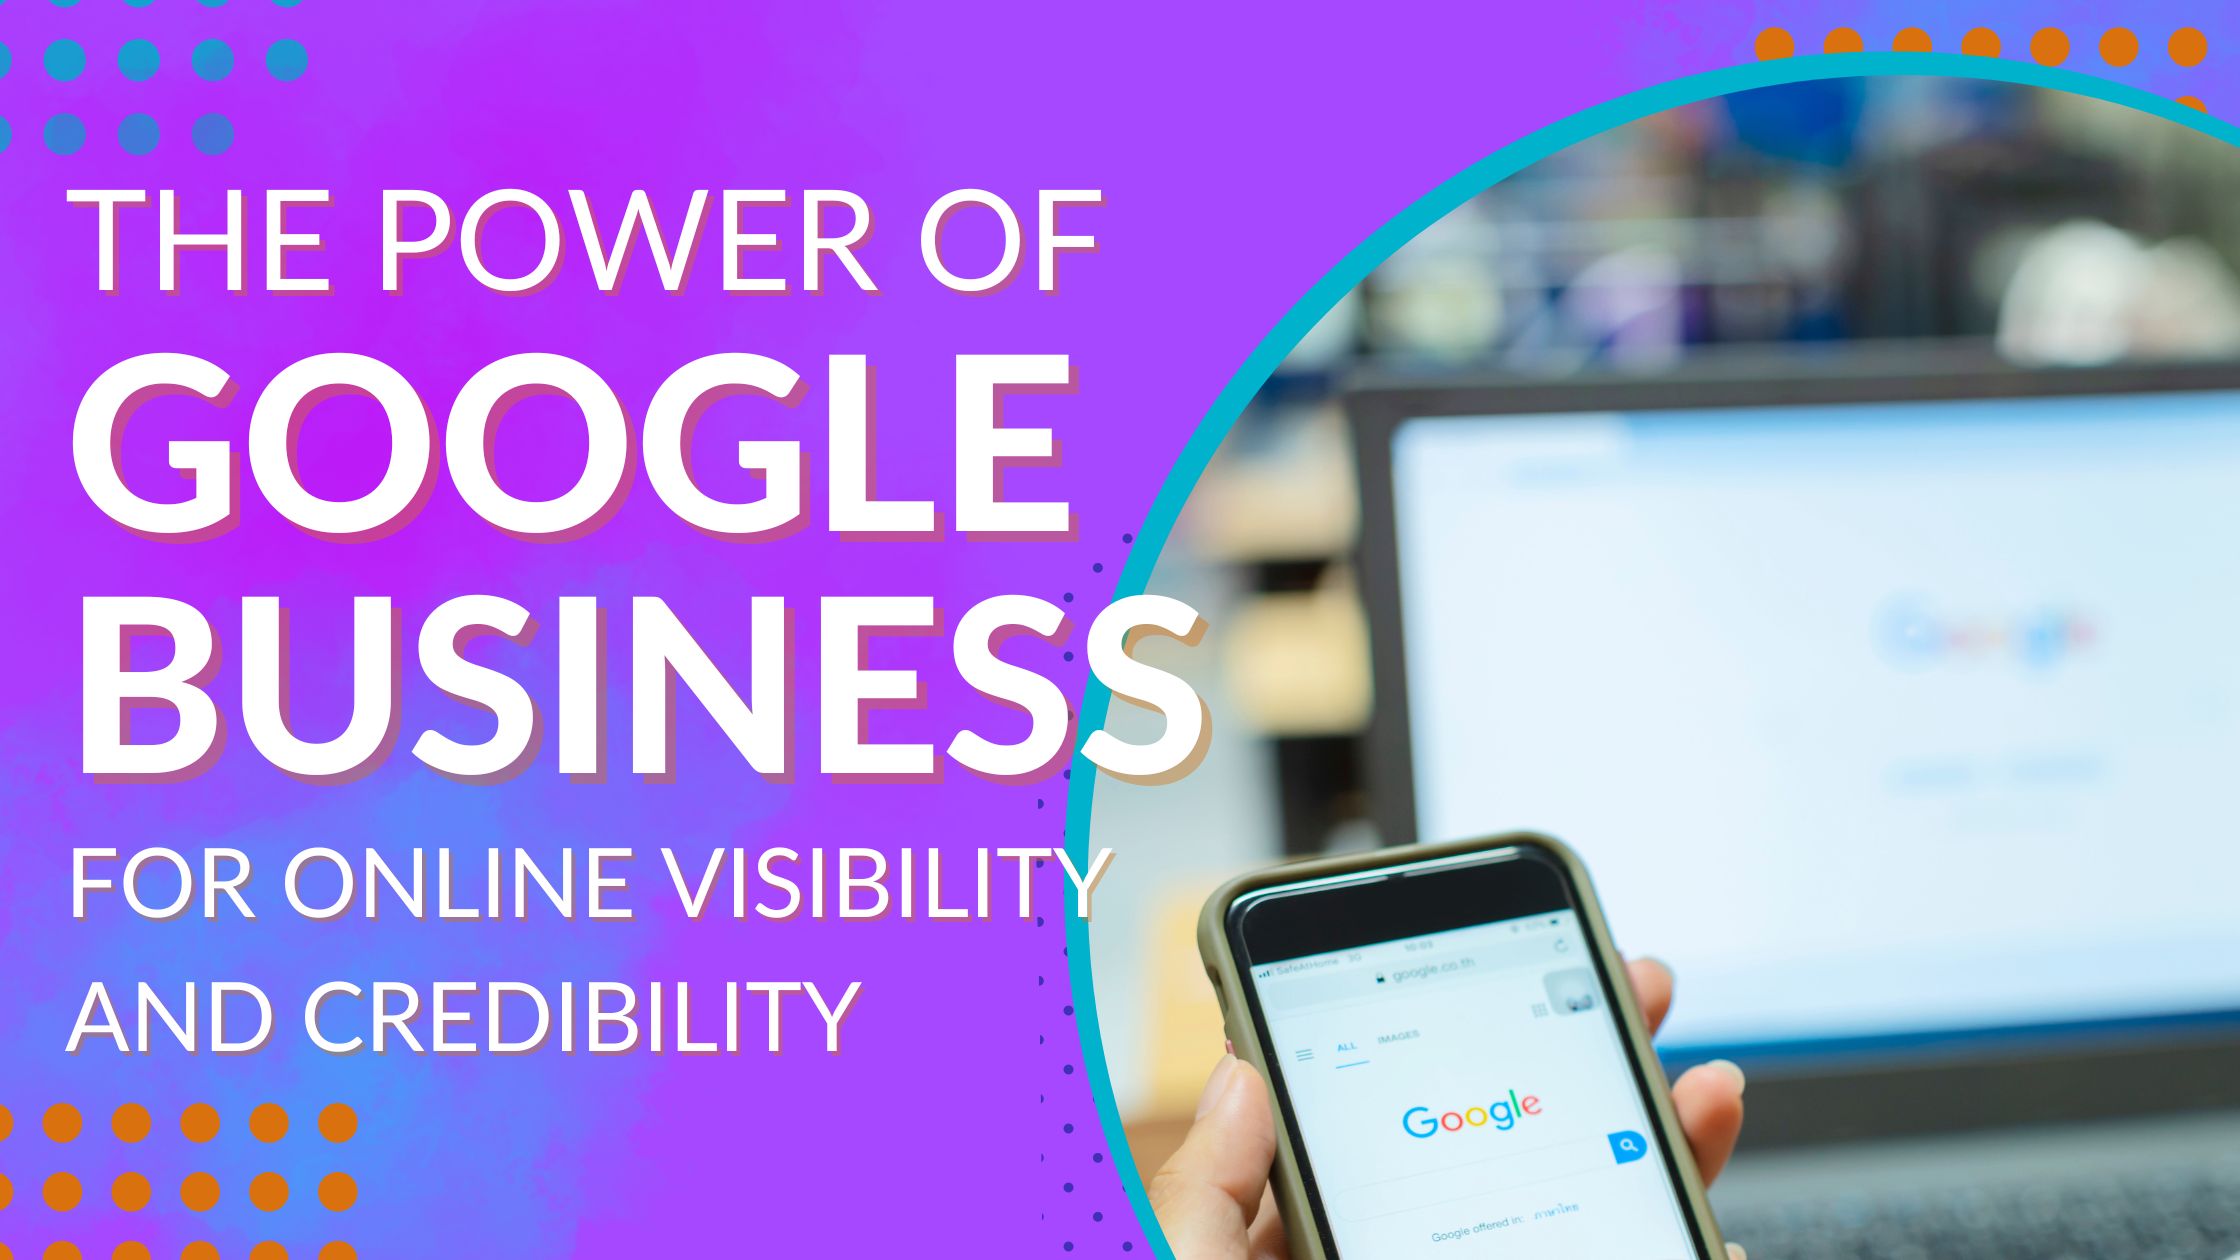 Let Express My Media drive traffic with an engaging google business profile